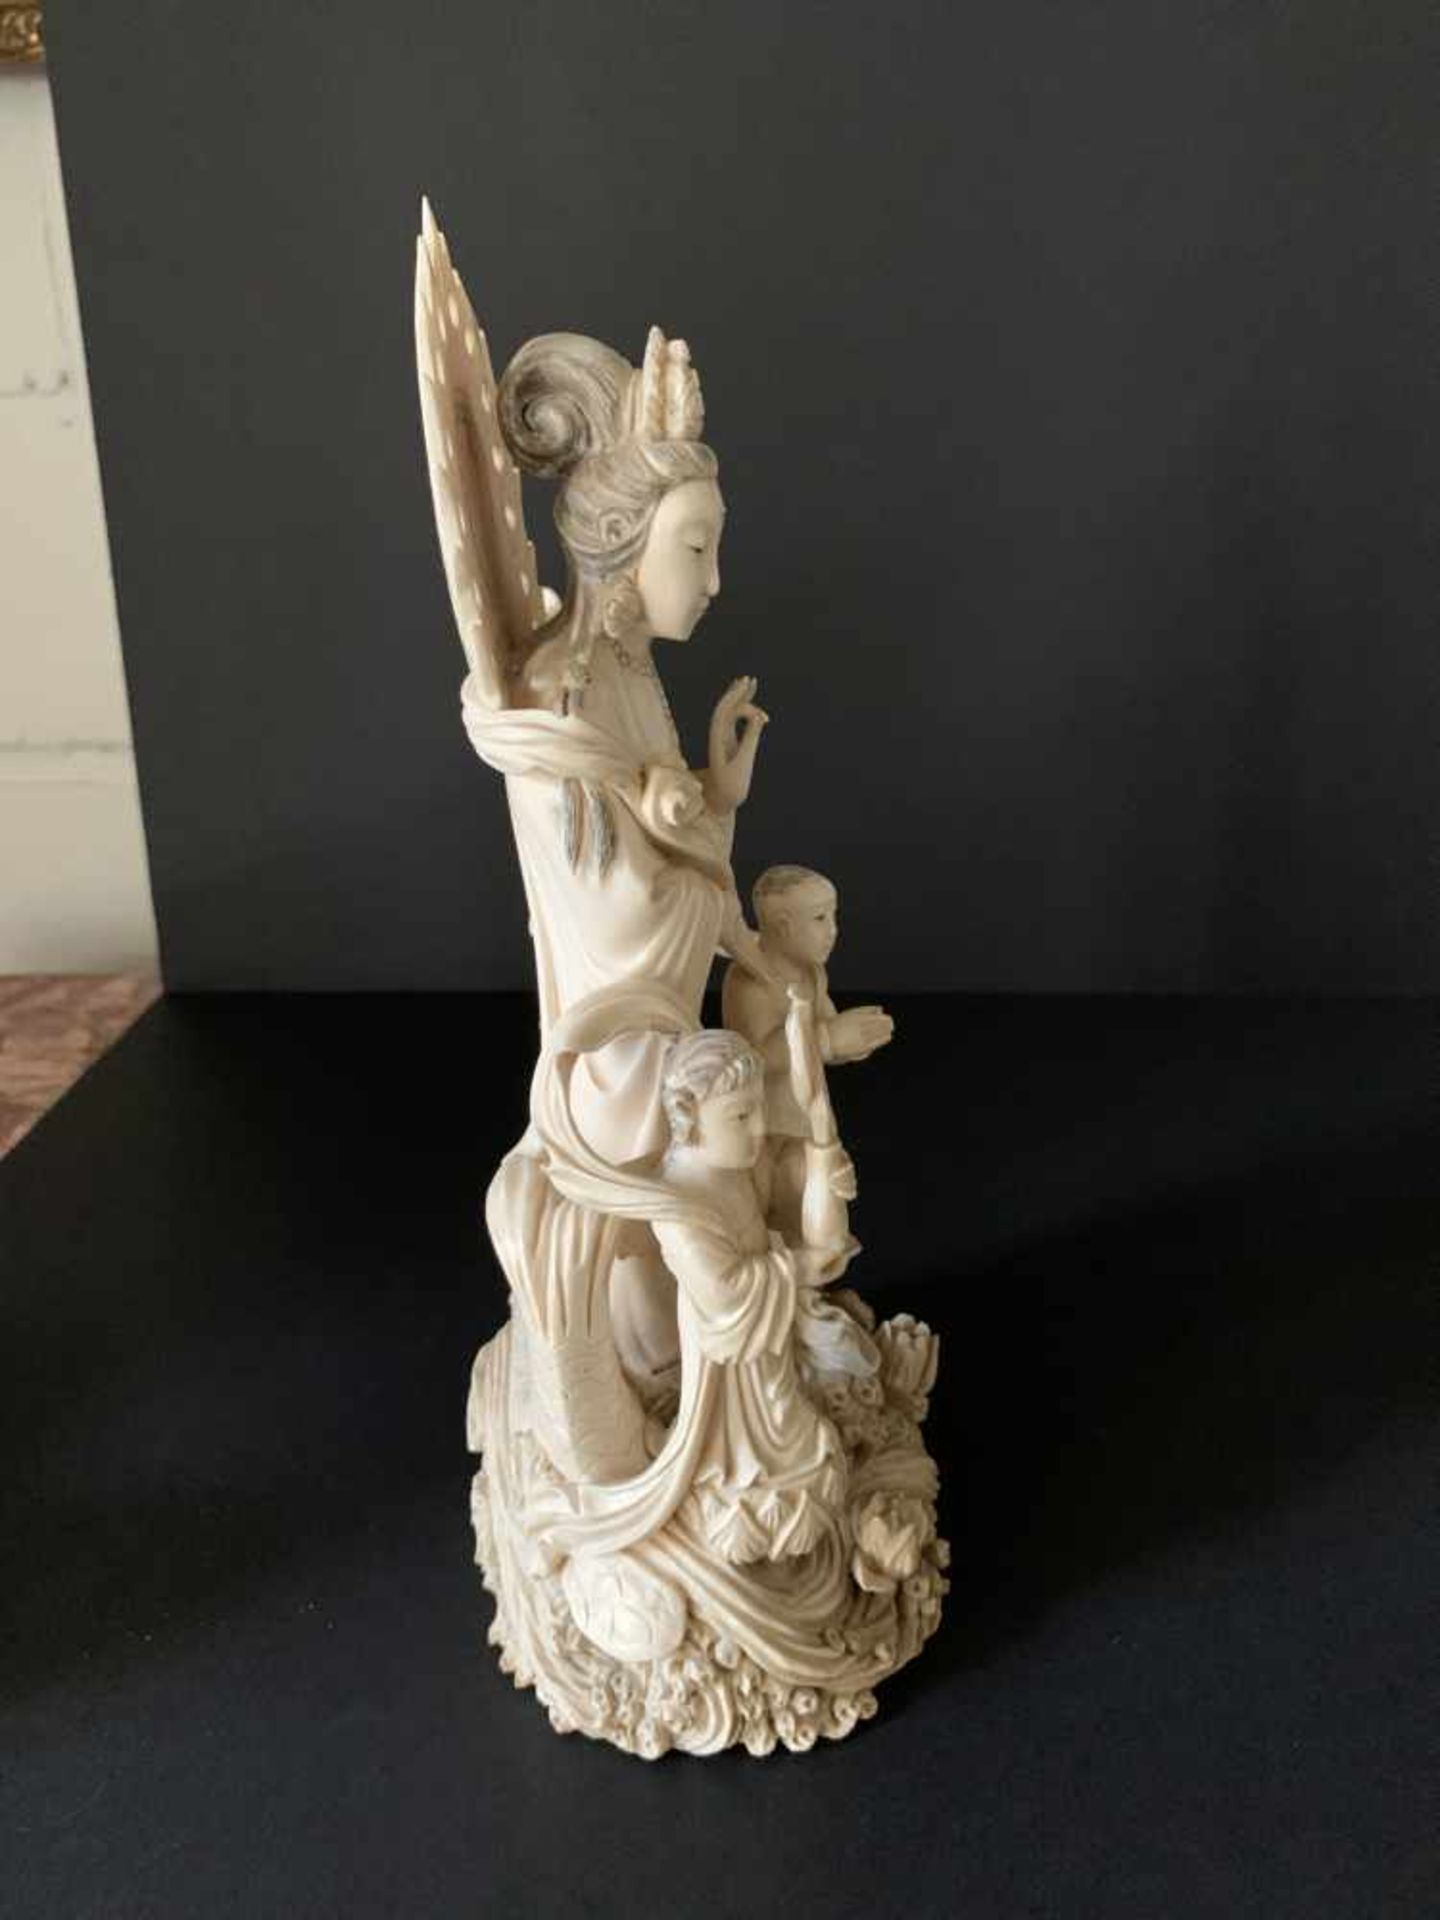 Chinese sculpture group of Guanyin with 2 children1920 Certificate of Arts Ivory ExpertsH 26 cm - Bild 4 aus 5